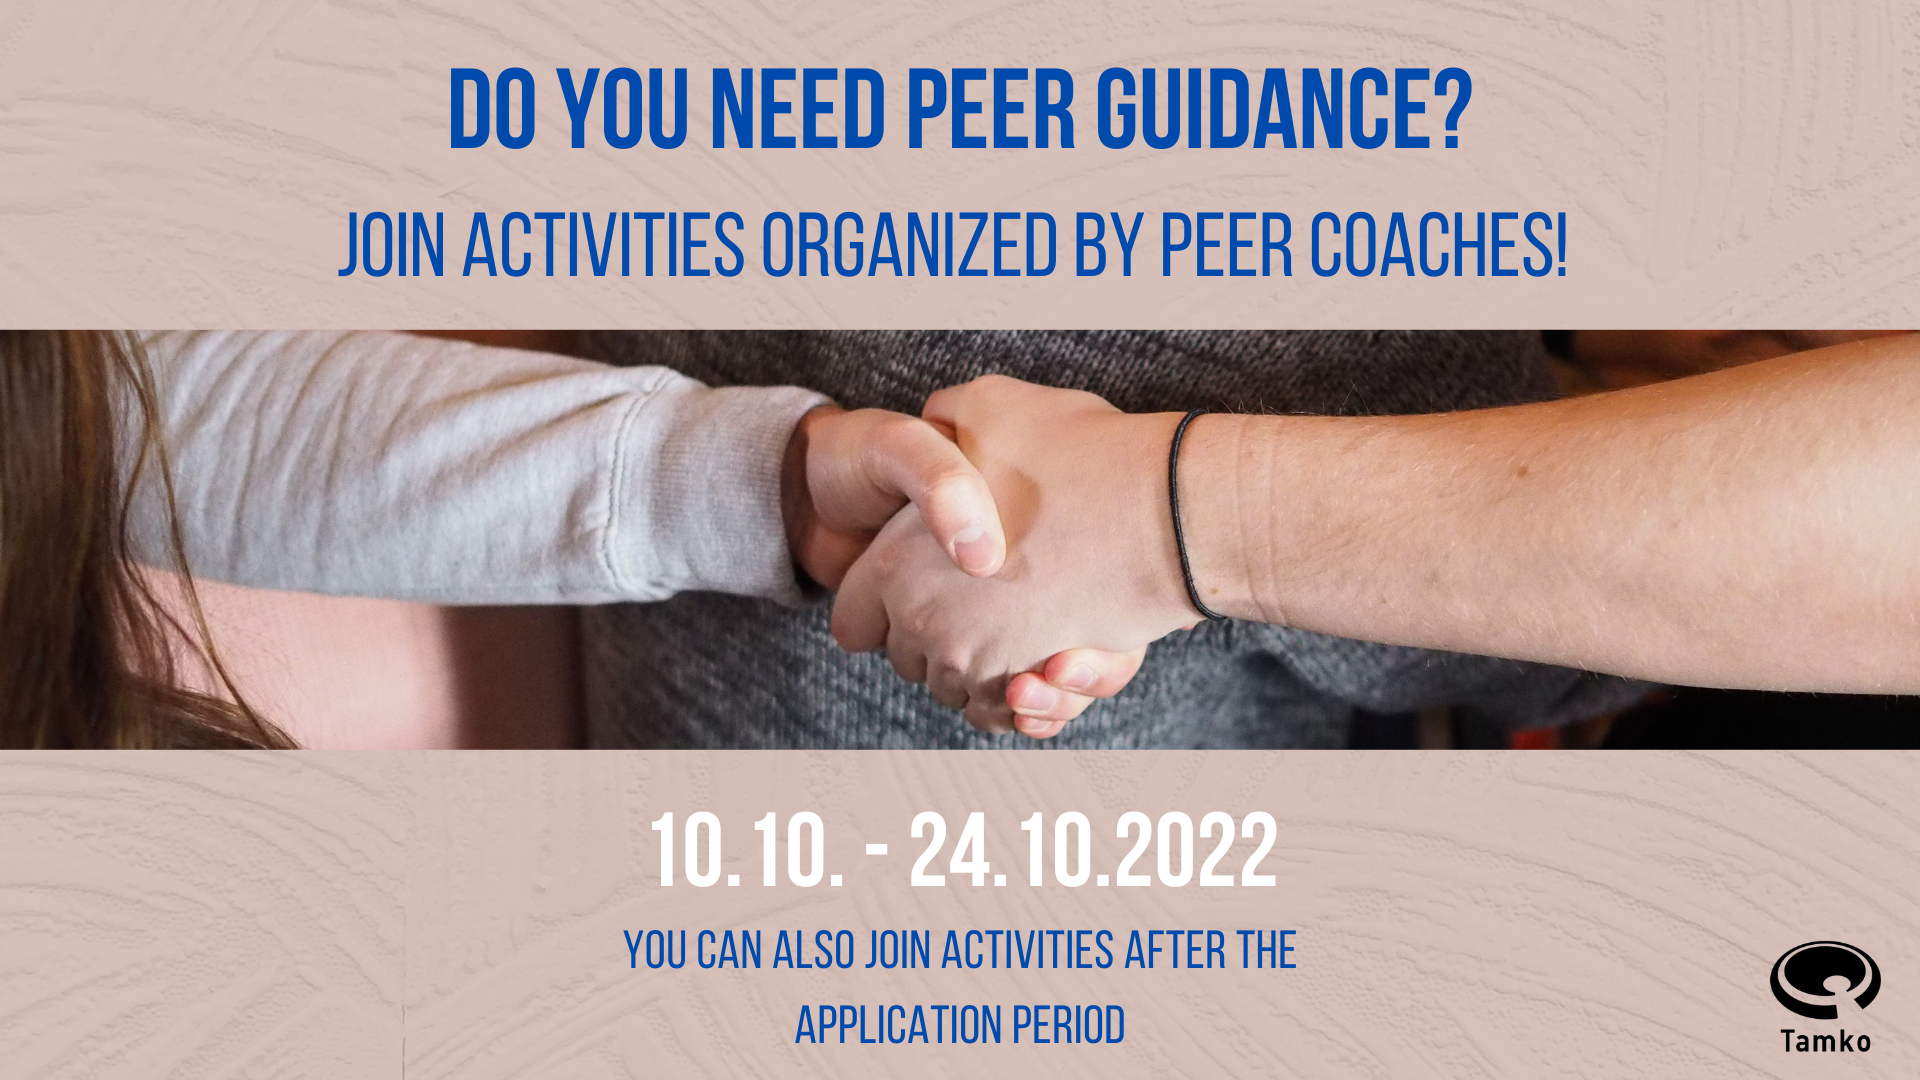 Join the activities organized by Peer Coaches!